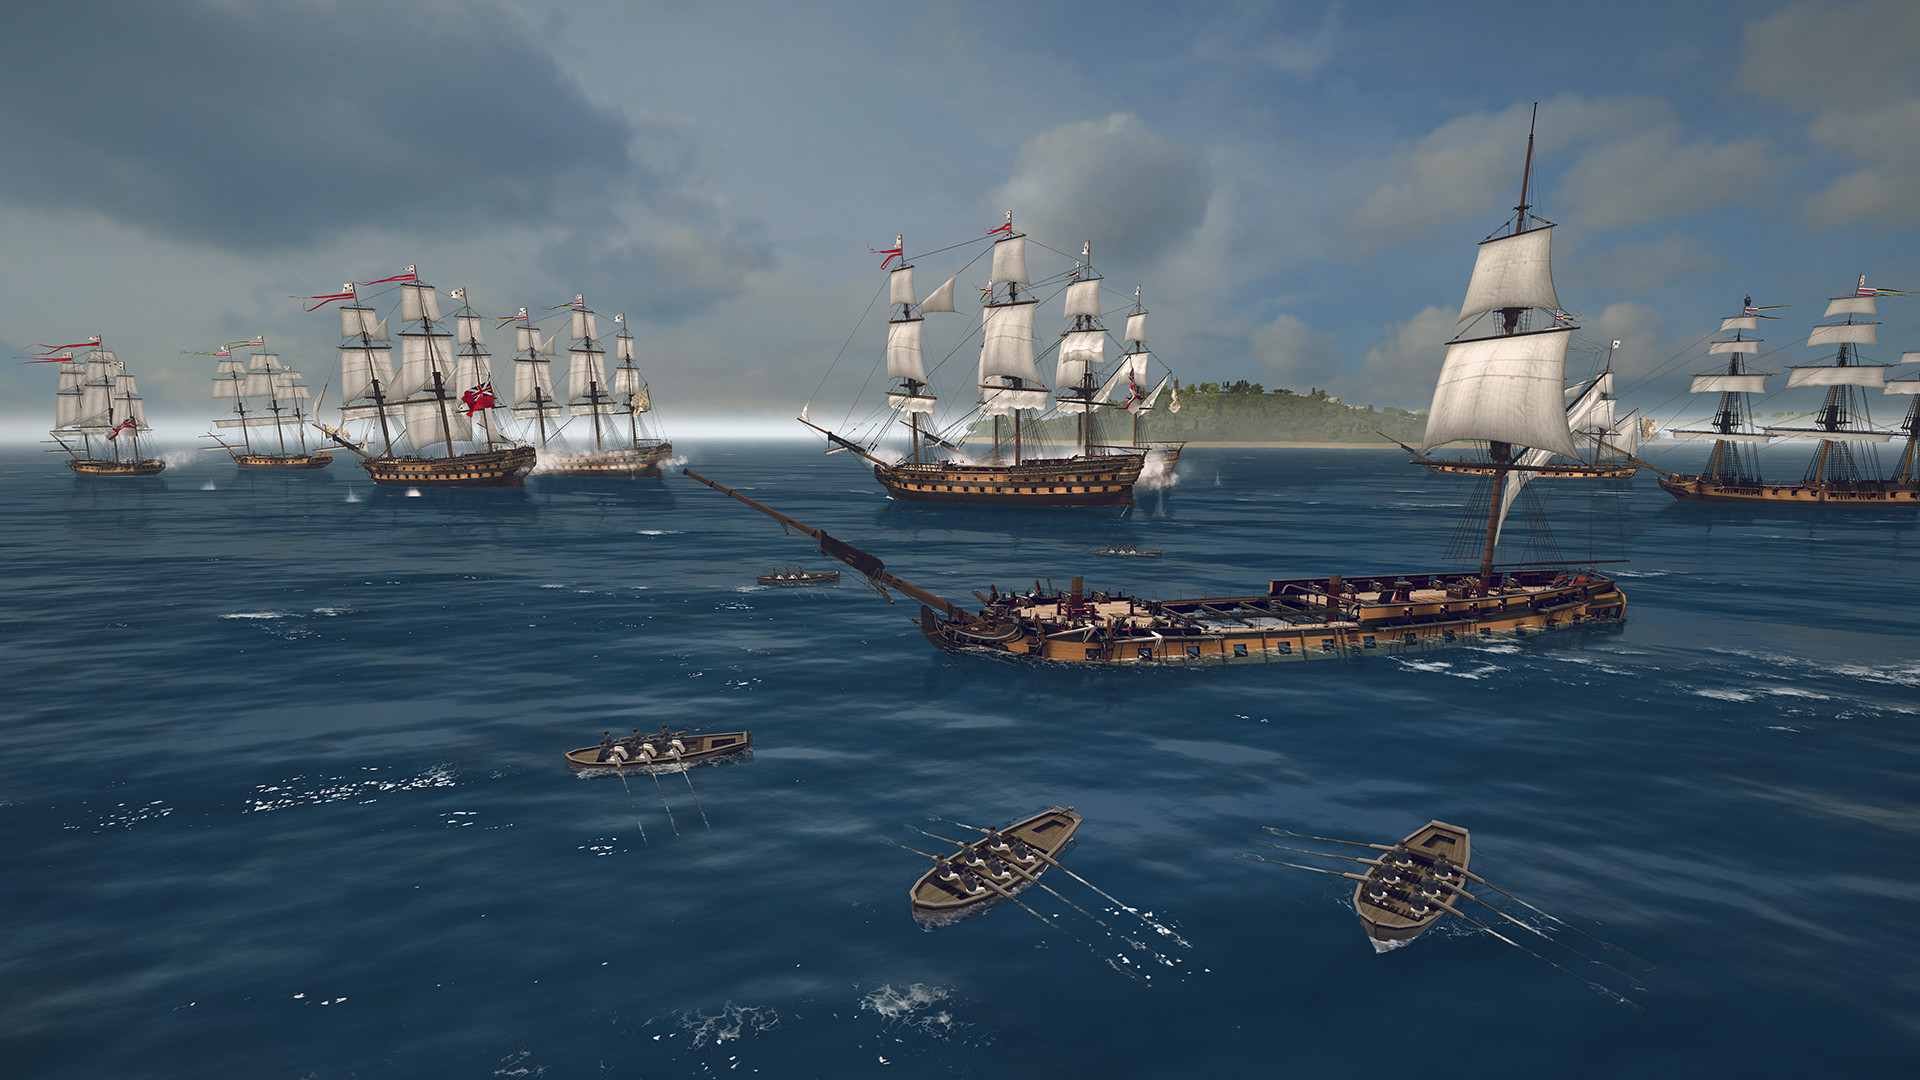 Ultimate Admiral: Age of Sail Free Download